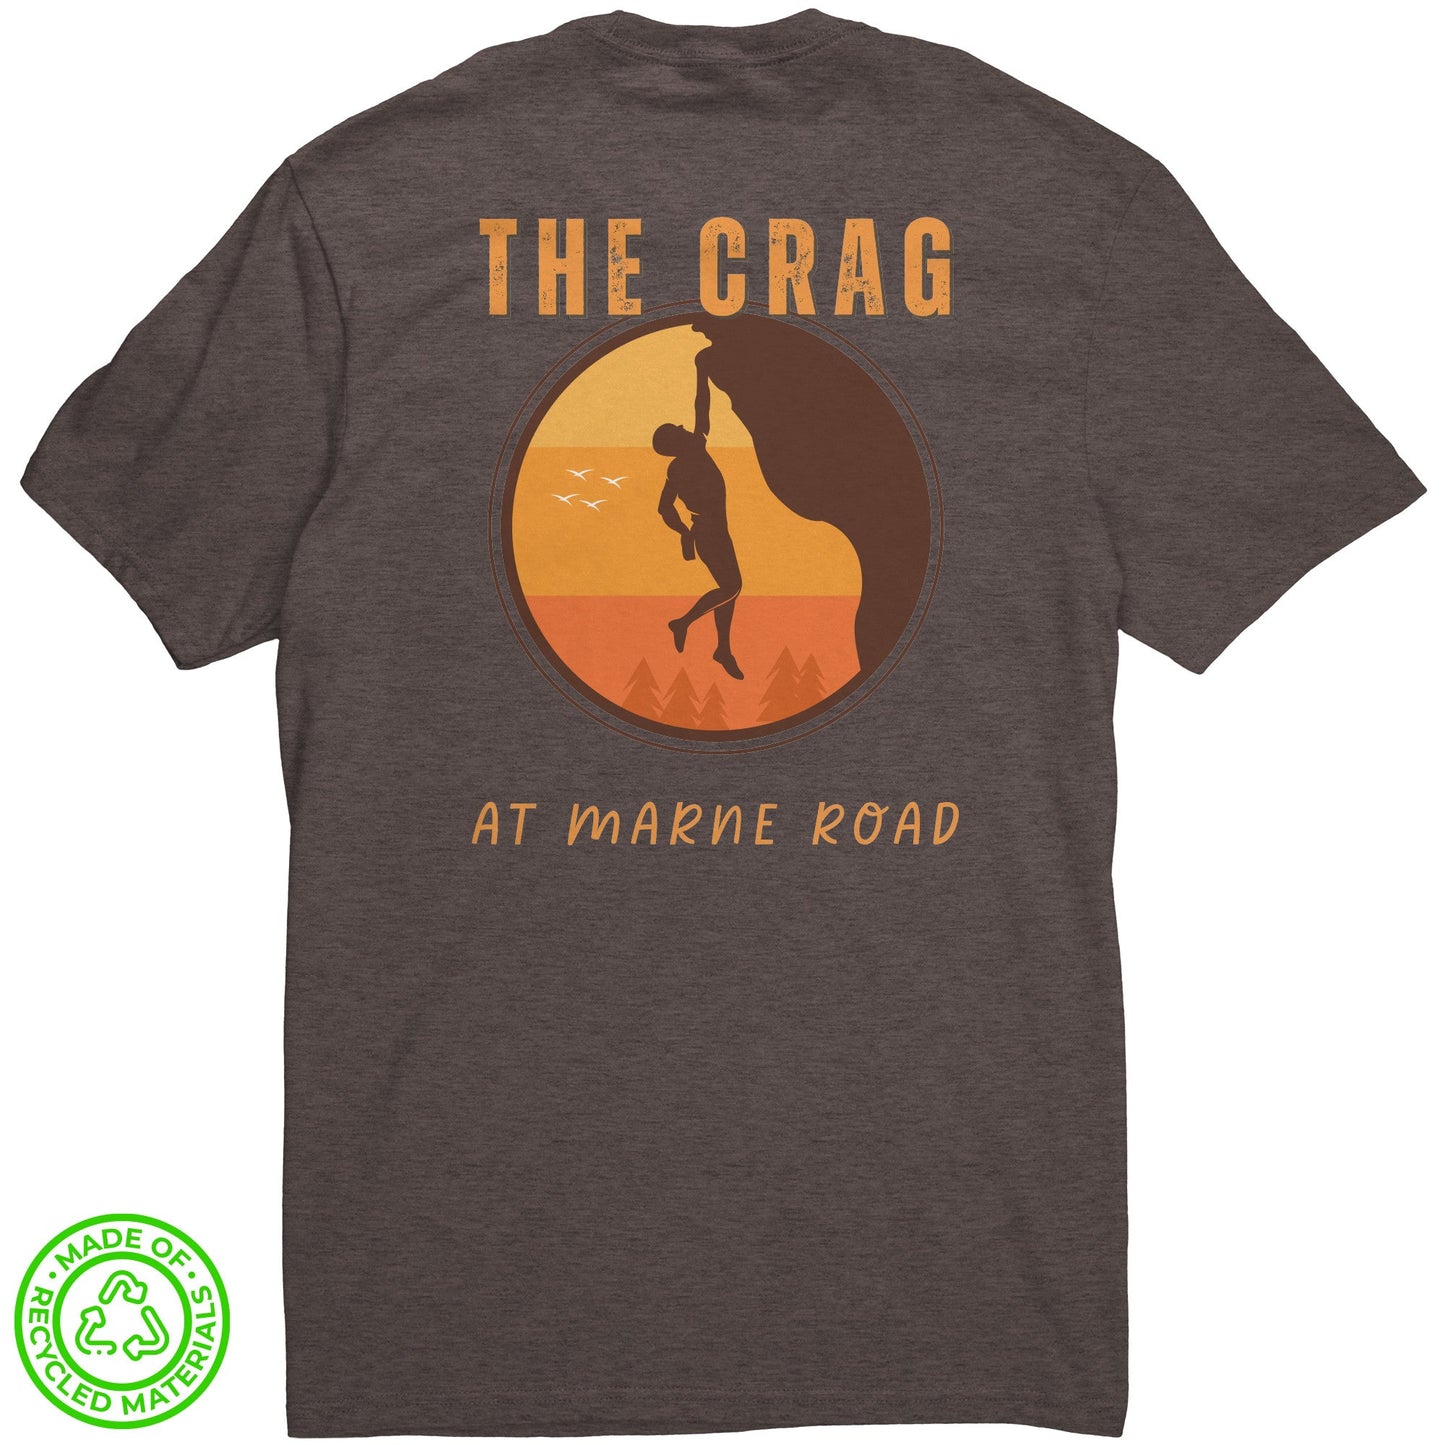 Eco-Friendly Re-Tee (Marne Rd Crag Circle Silhouette)